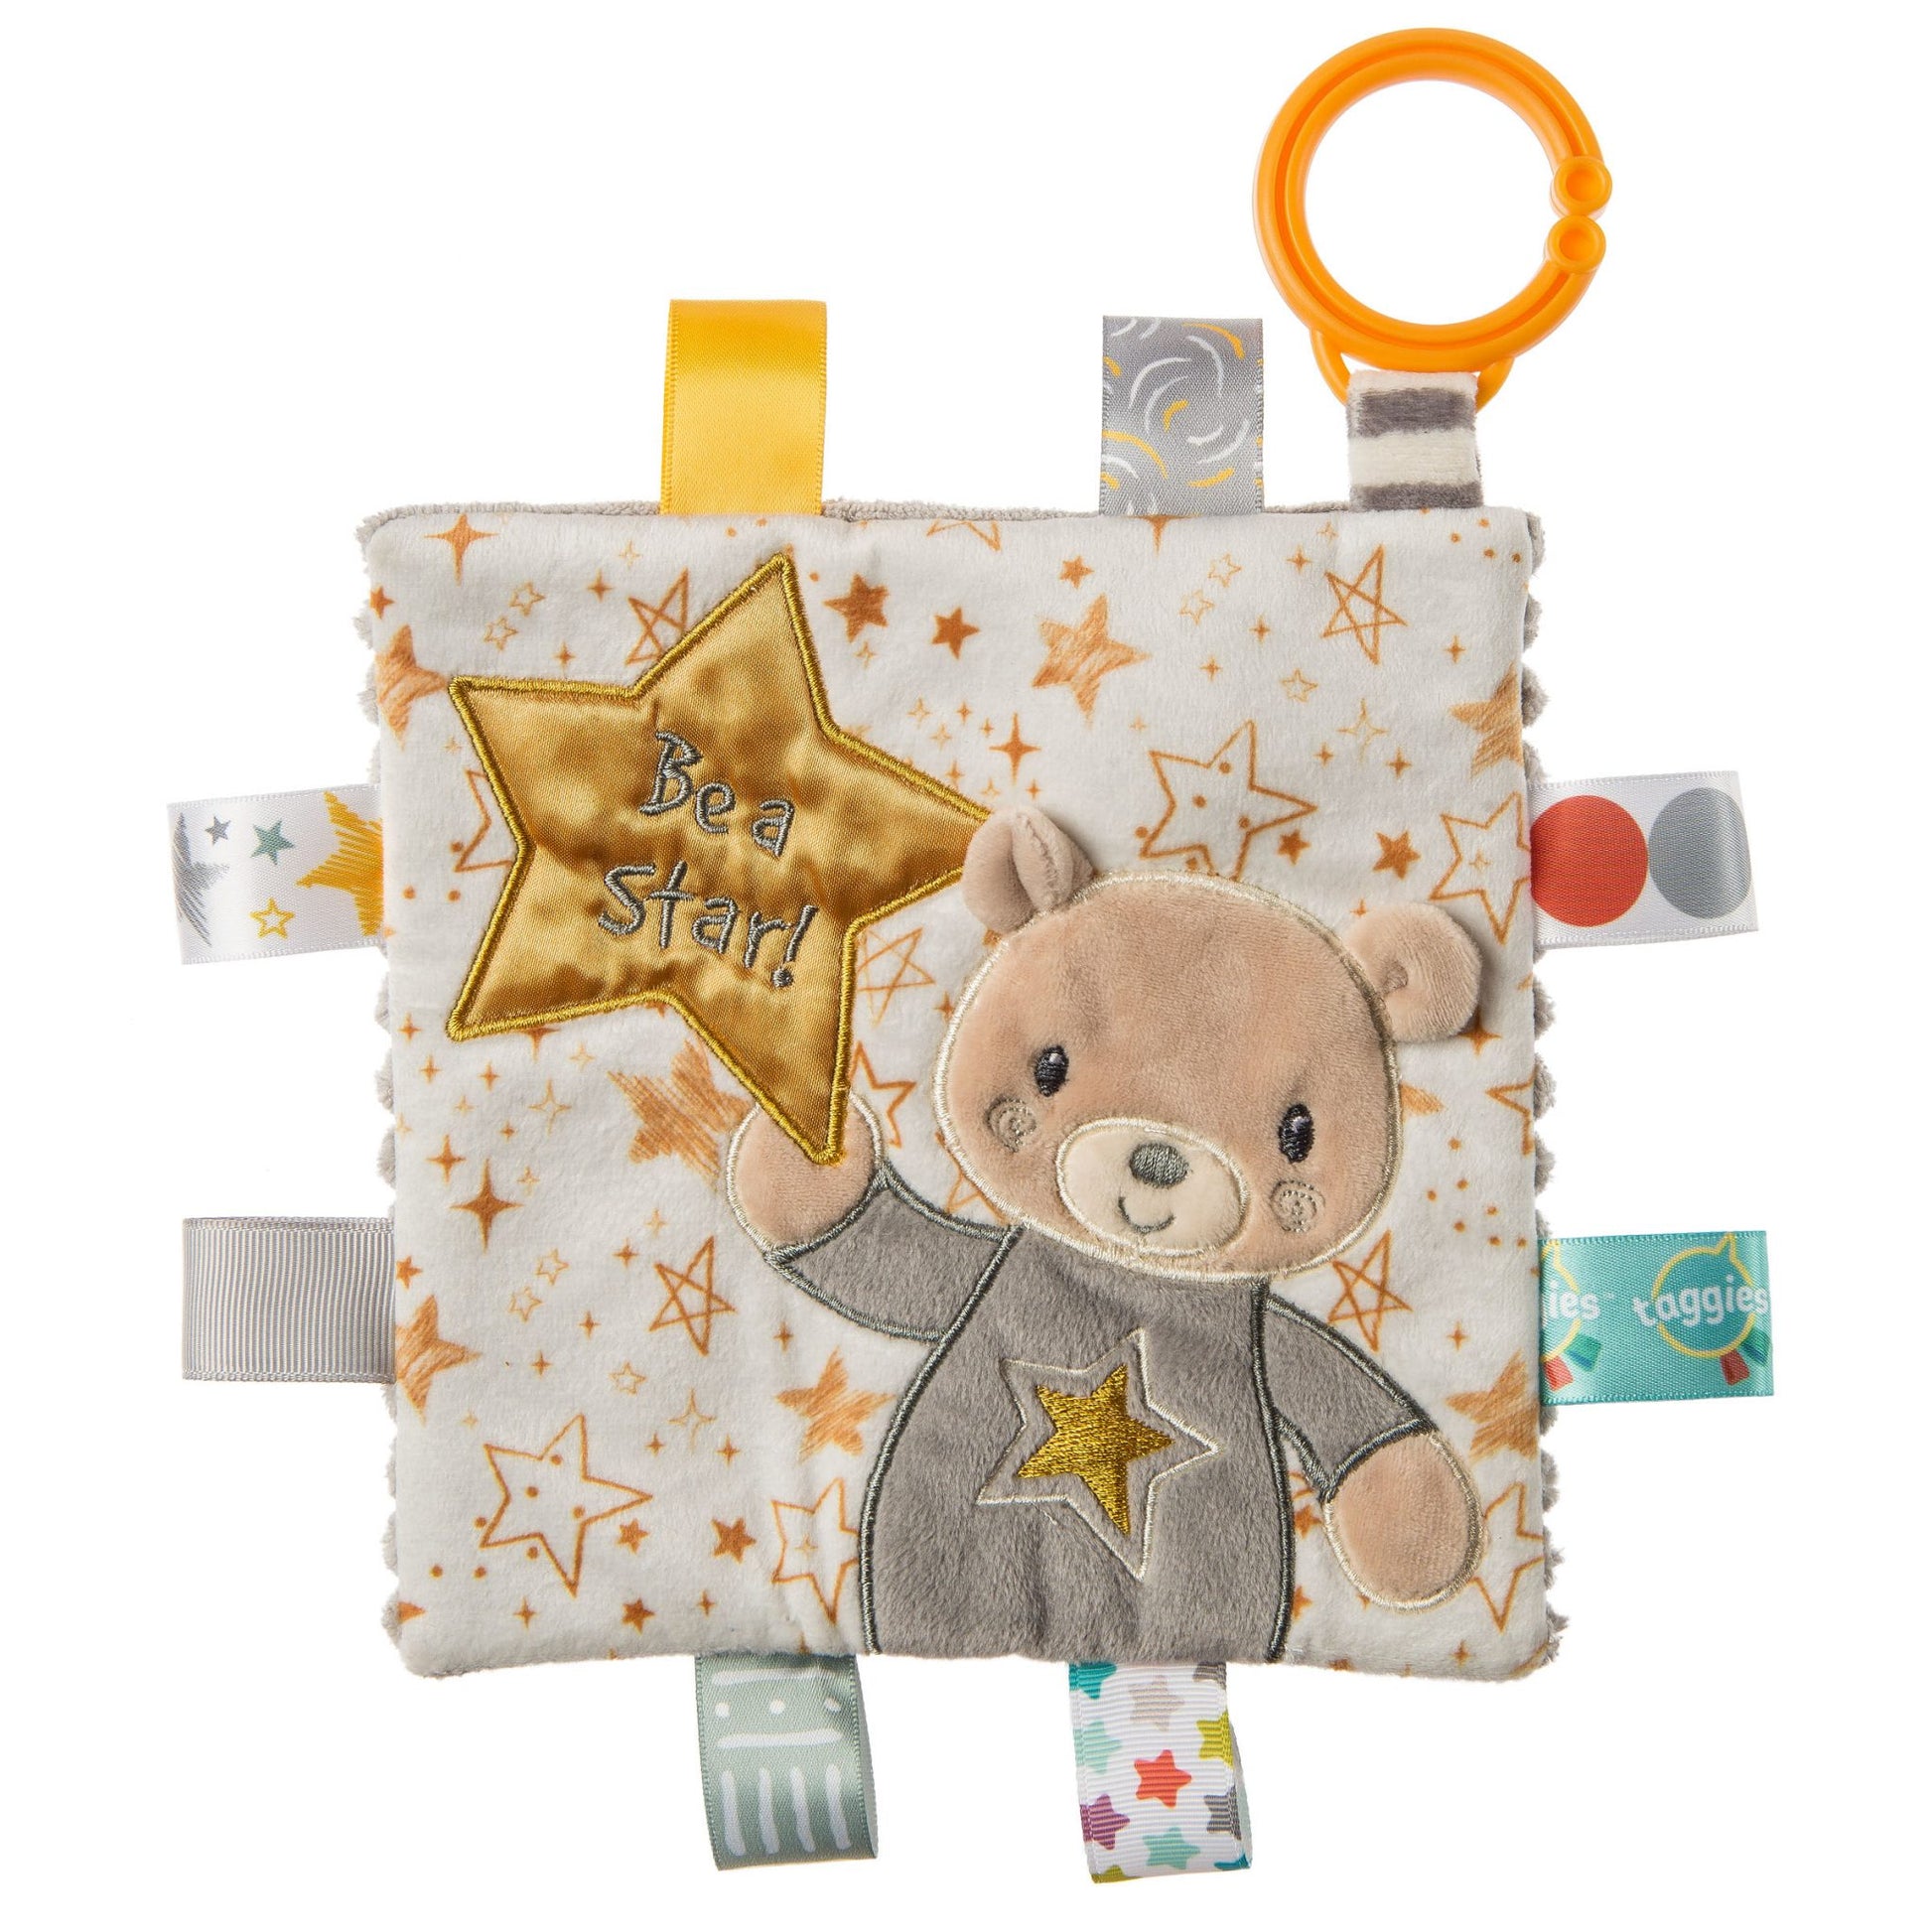 be a star crinkle toy on a white background